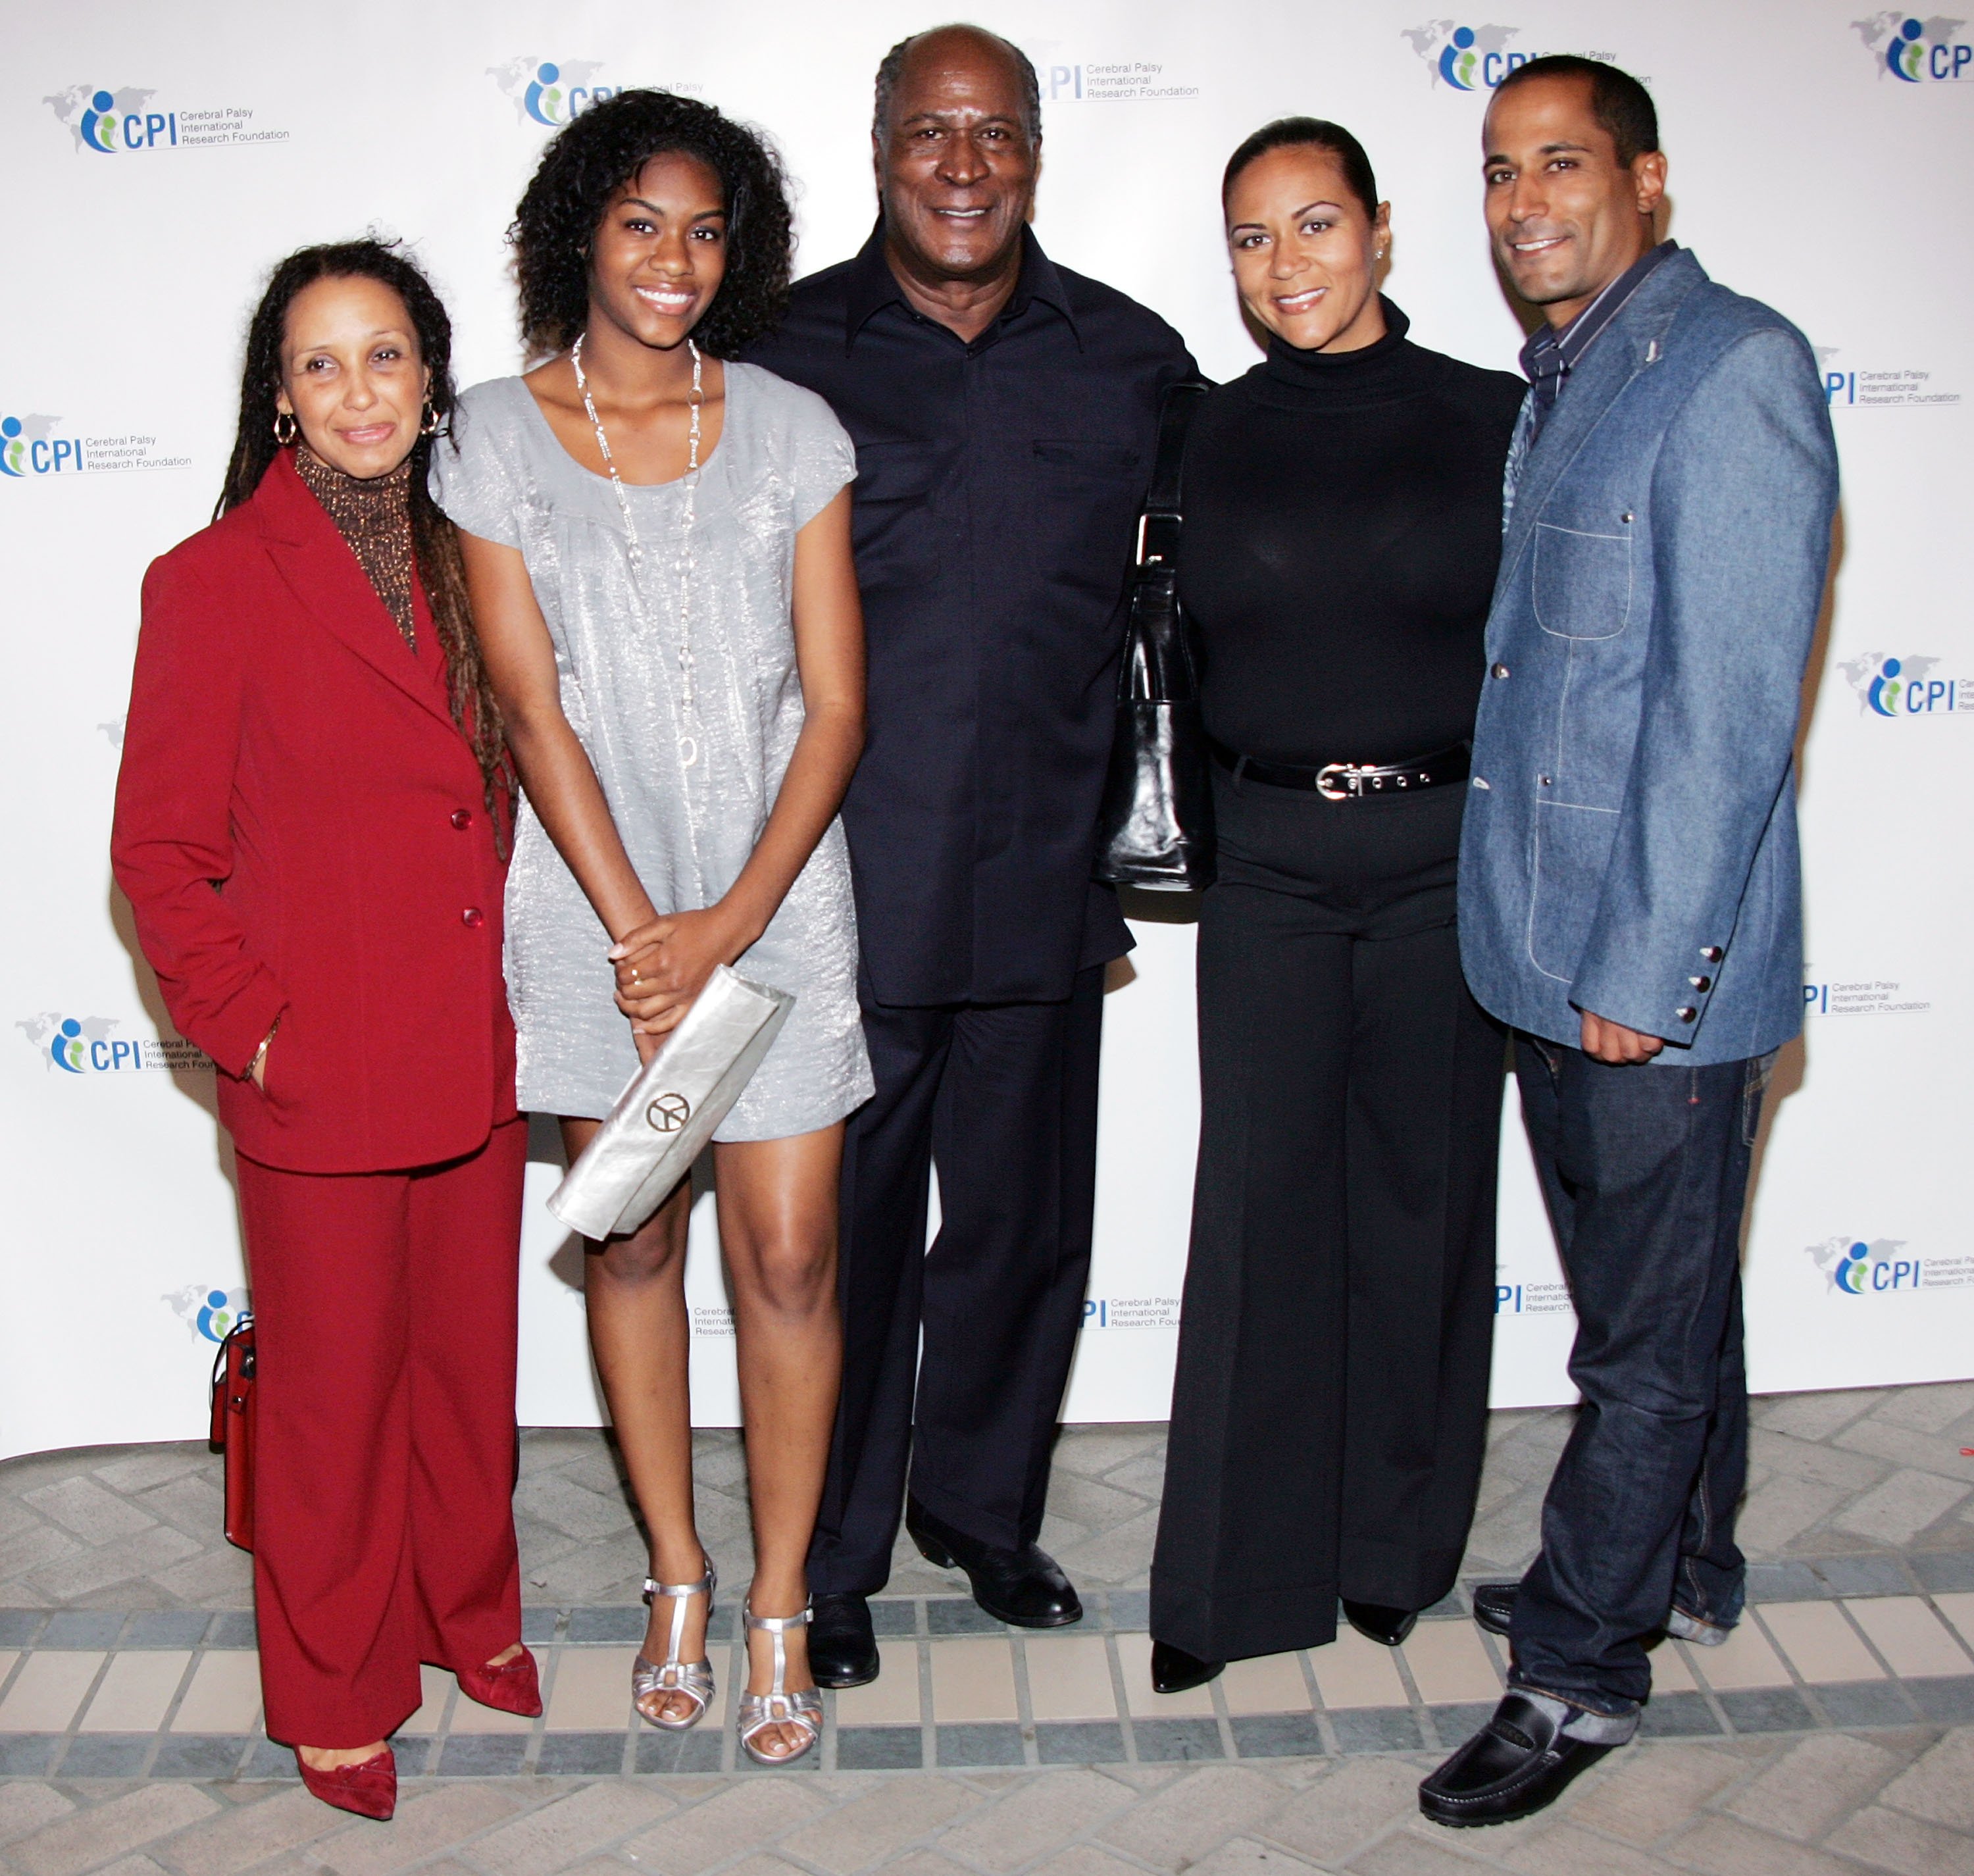 John Amos, Shannon Amos, K.C. Amos and friends on December 3, 2008 in Los Angeles, California. | Source: Getty Images